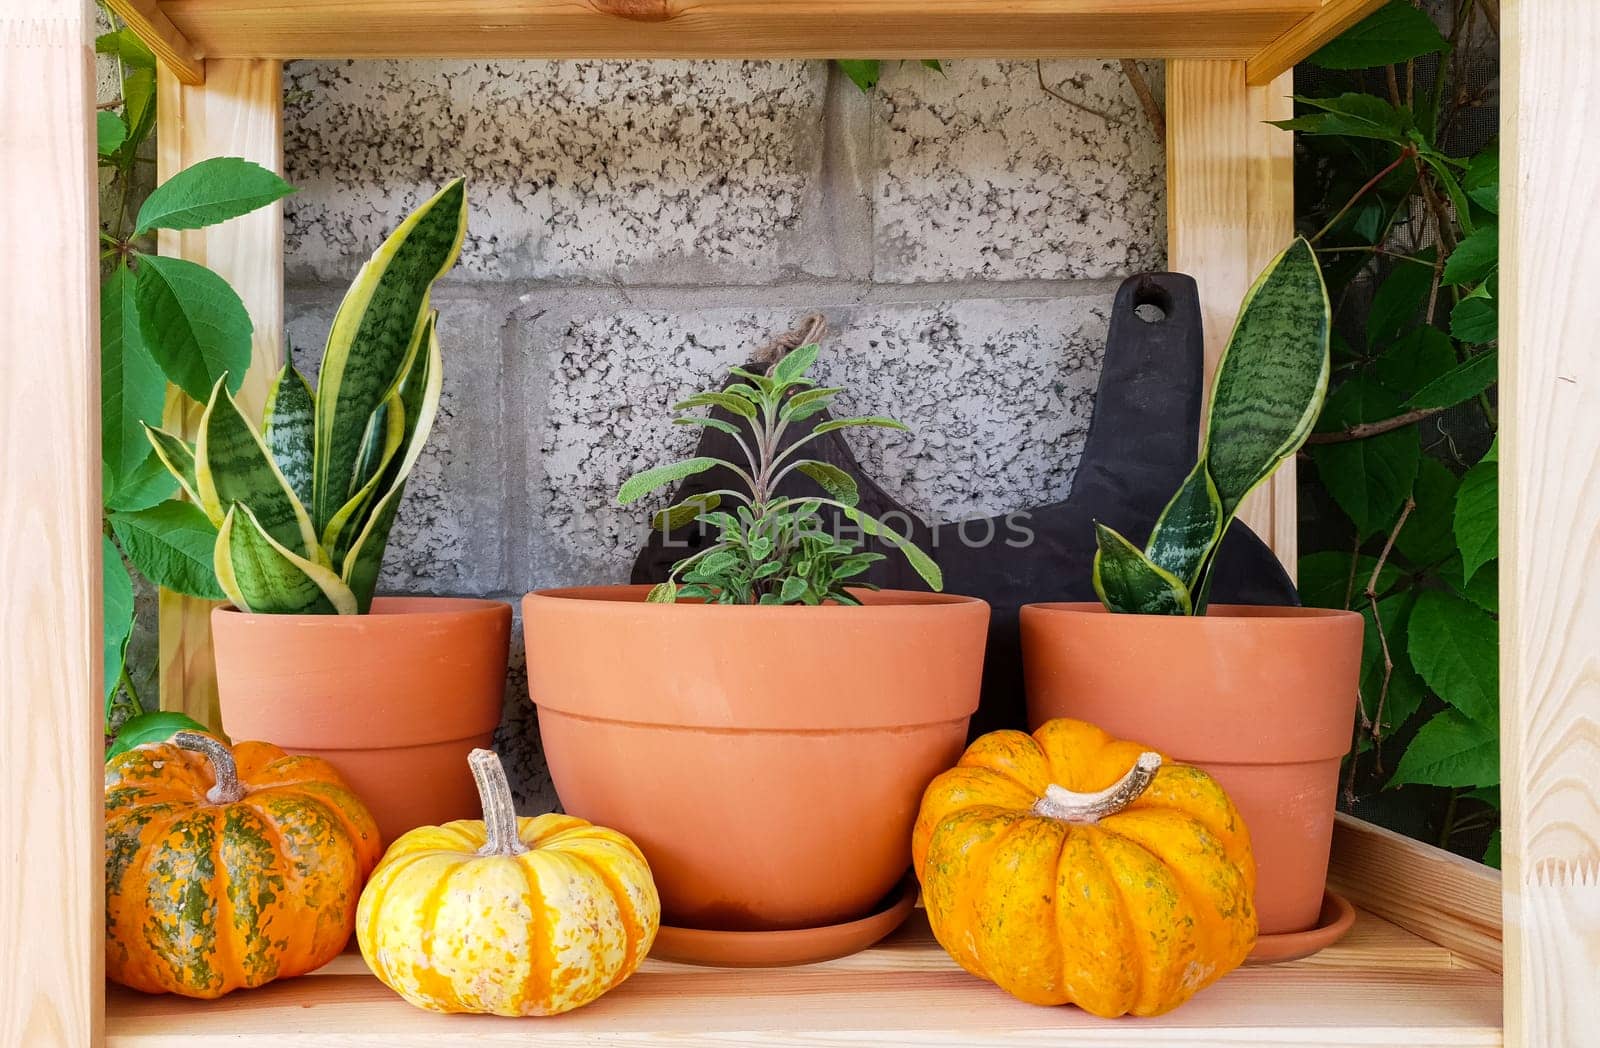 On a wooden shelf in clay pots there are green houseplants and yellow decorative pumpkins